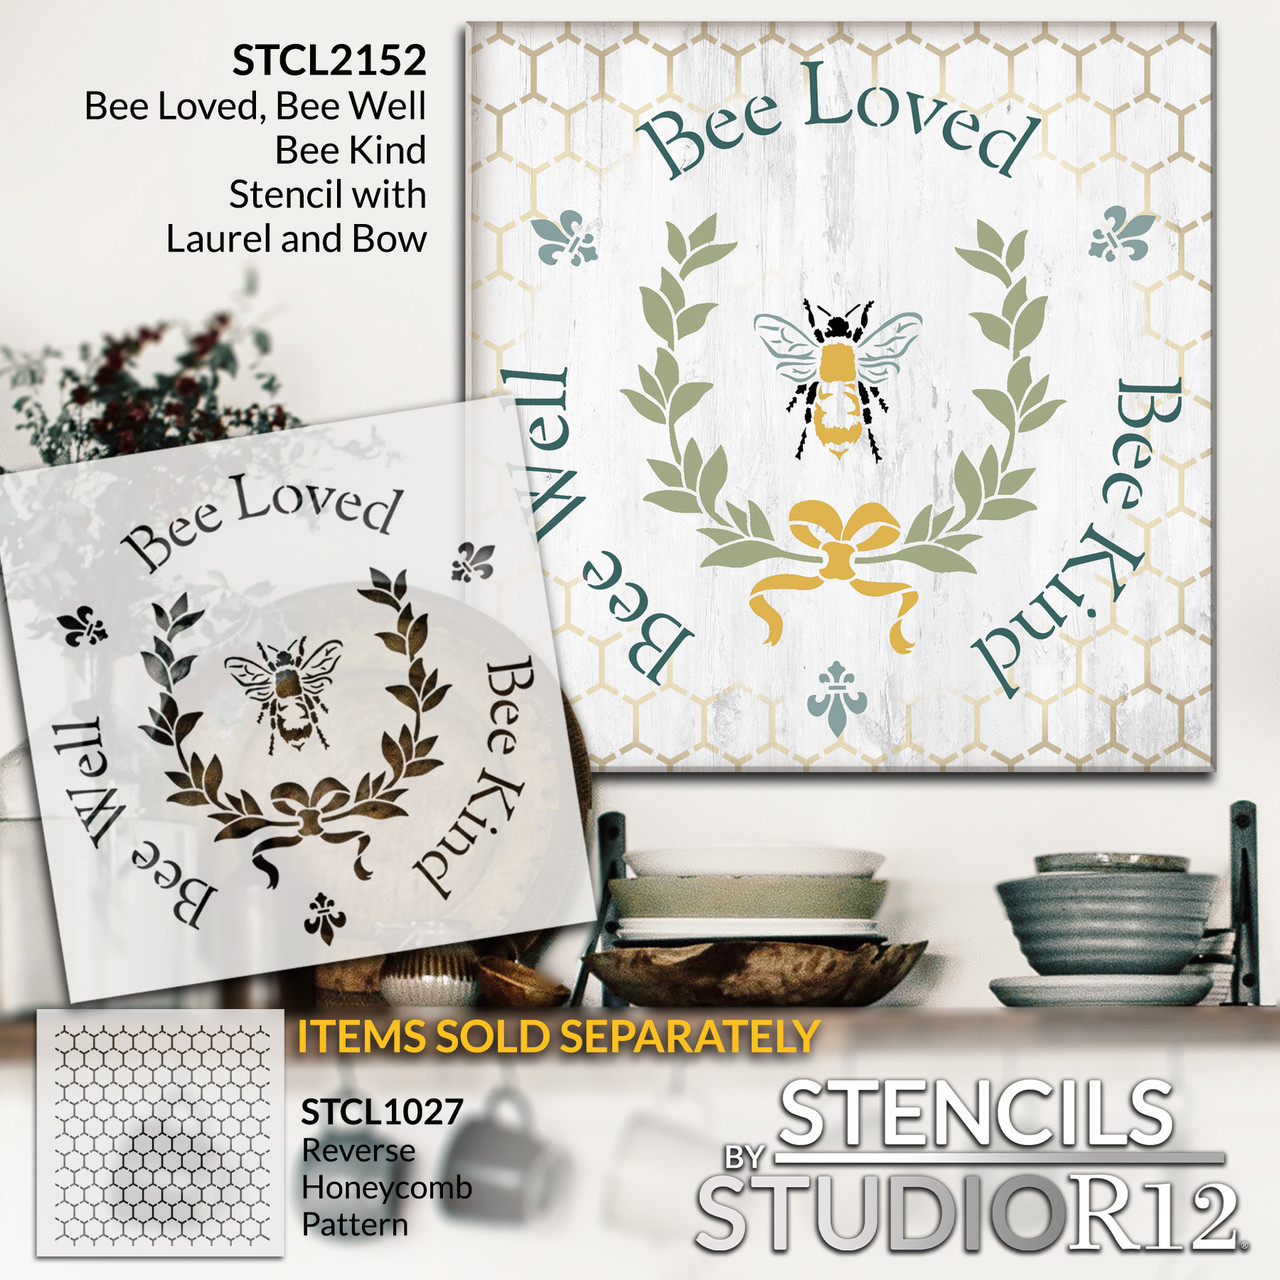 Bee Kind, Bee Well, Bee Loved - Round  - Word Art Stencil - 12" x 12" - STCL2152_2 - by StudioR12